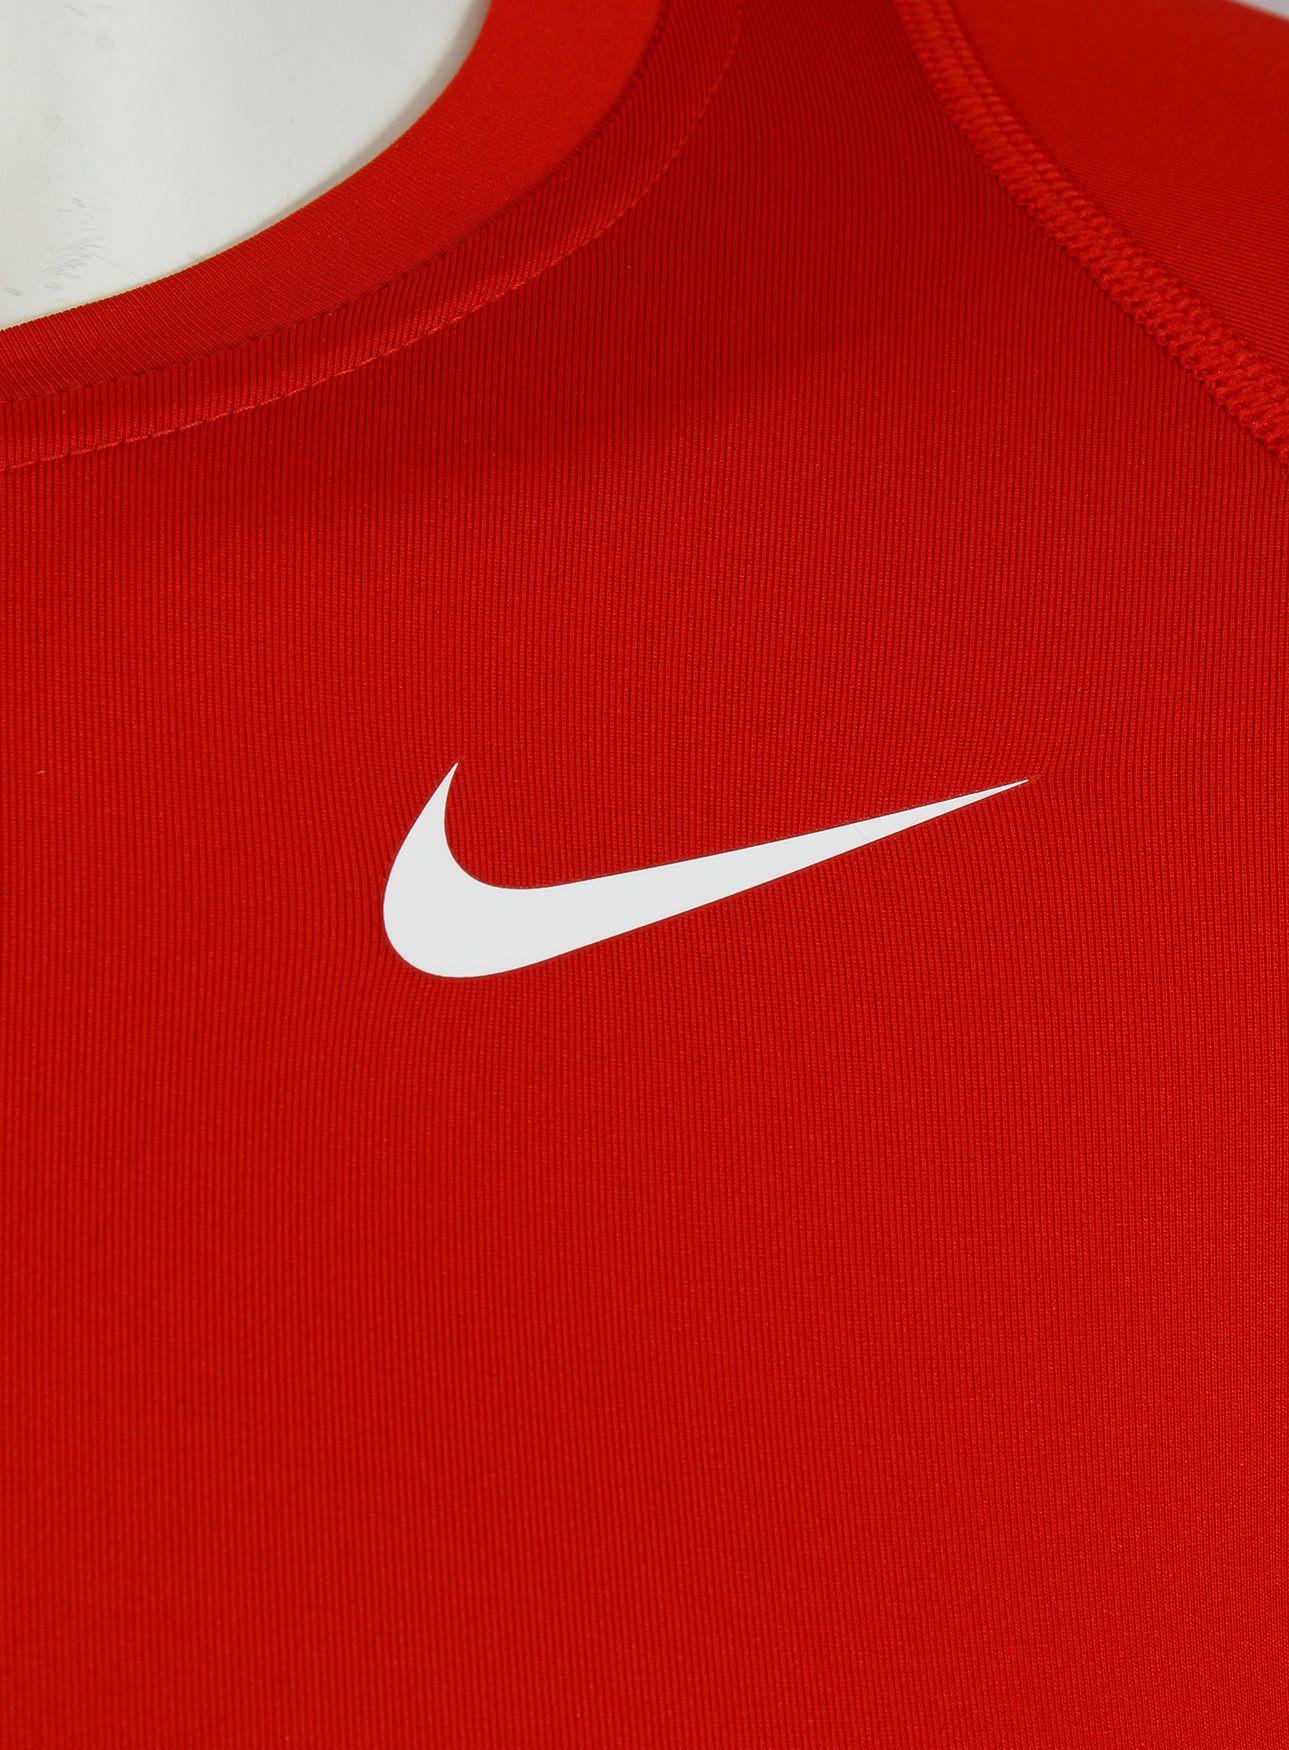 Cool Red Nike Logo - Nike Men's Pro Cool Dri Fit Long Sleeve Compression Top